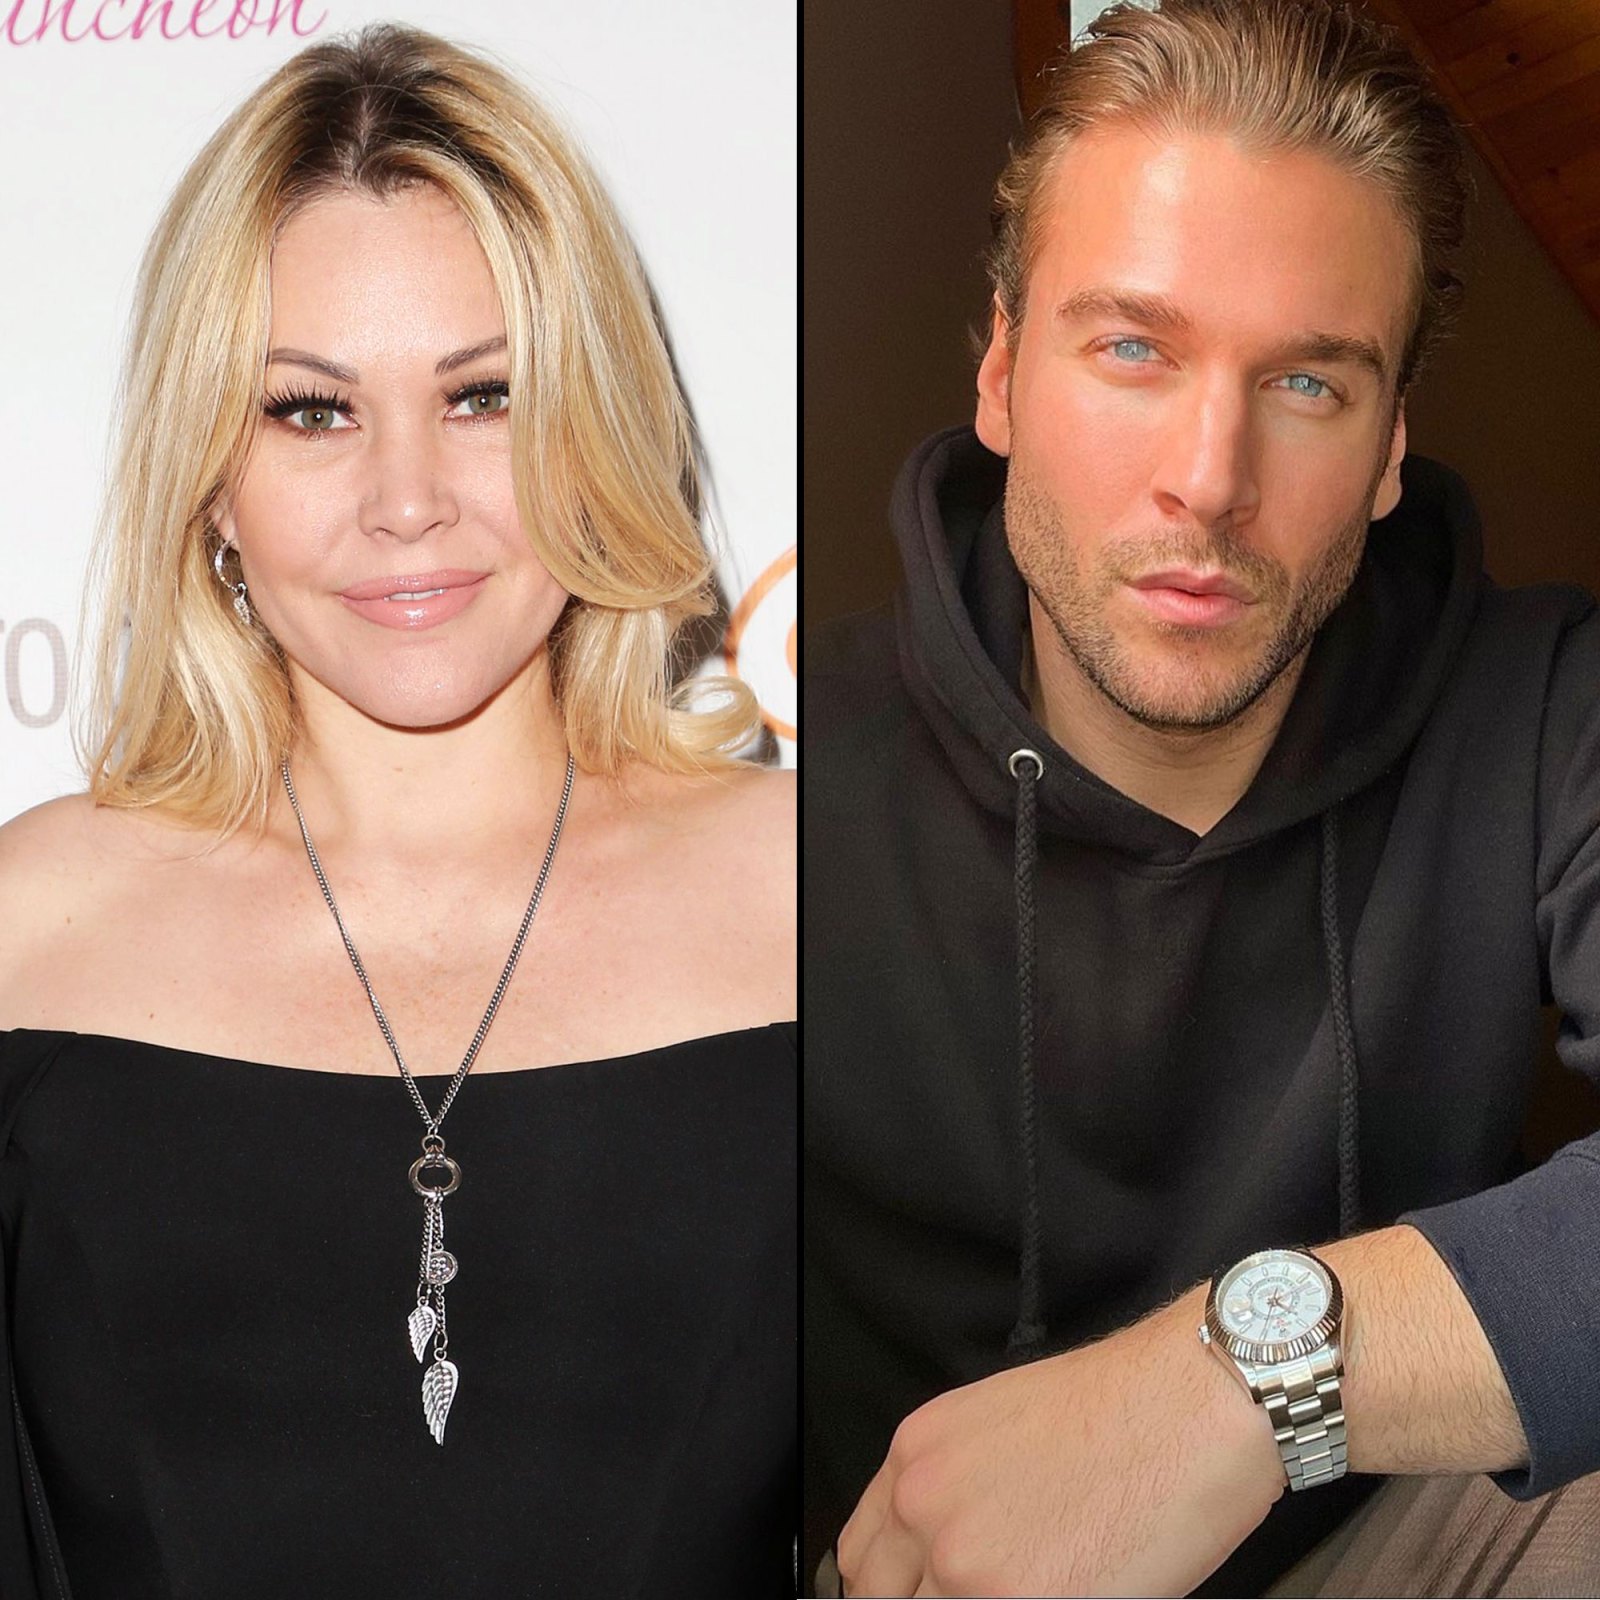 Shanna Moakler and Matthew Rondeau Are Back Together After He Supported Her Through Rough Time